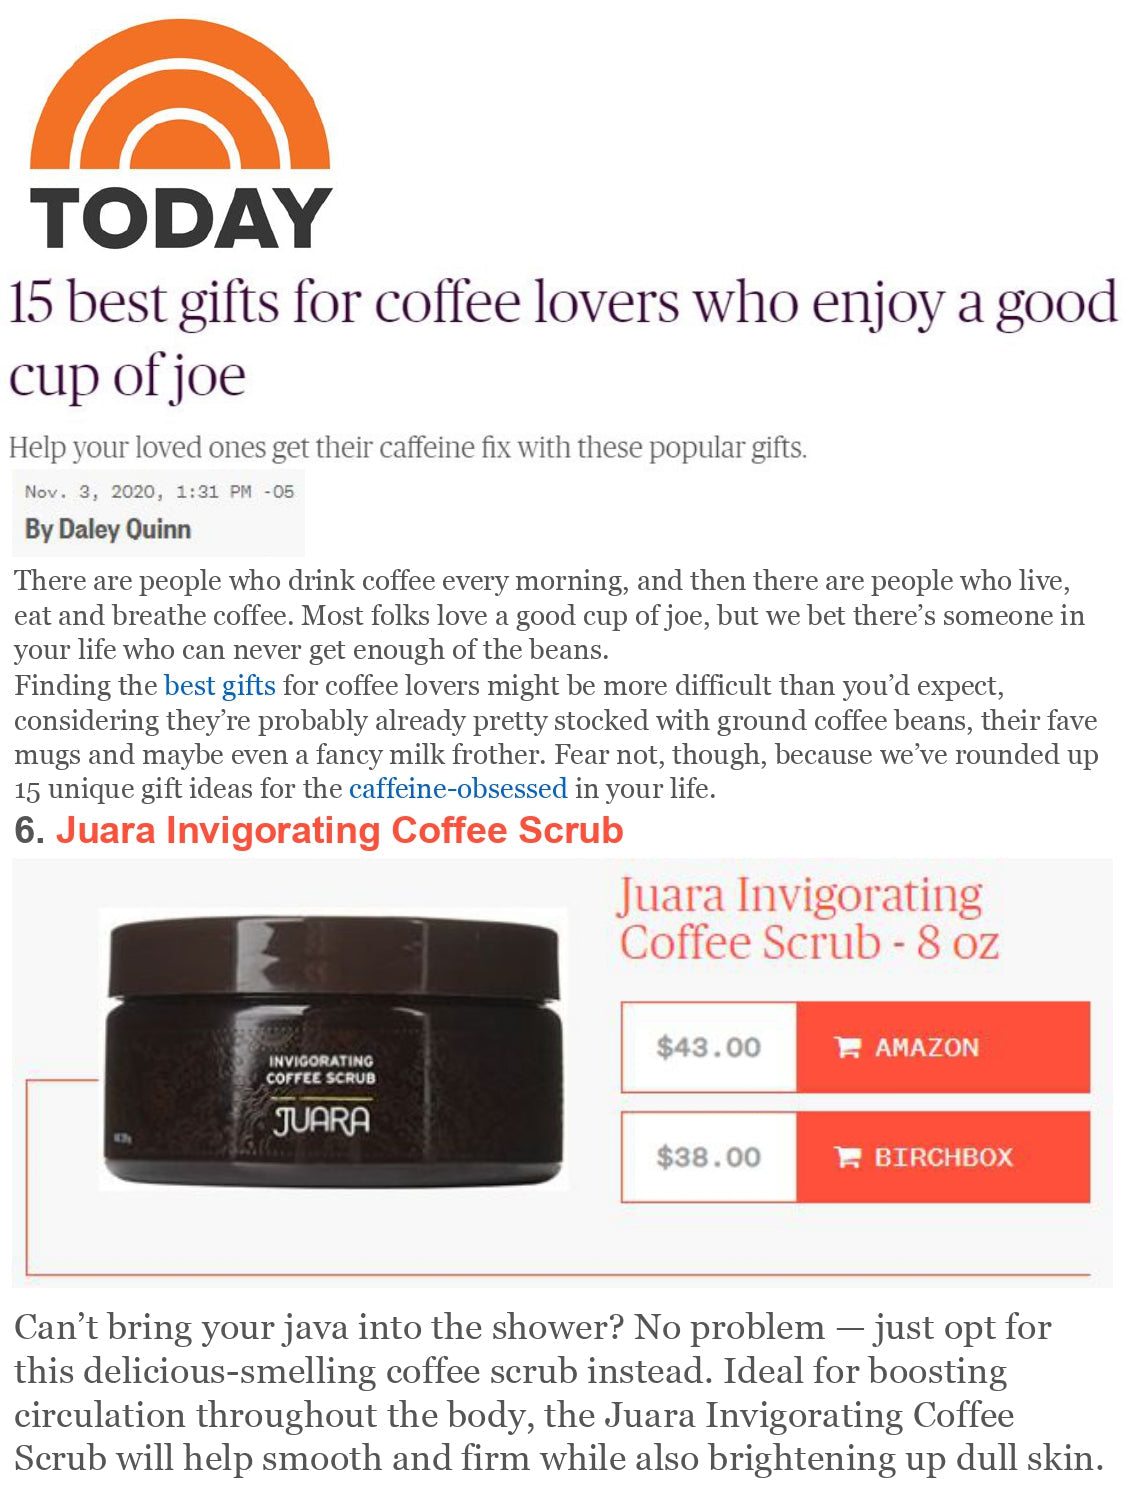 TODAY : 15 Best gifts for coffee lovers who enjoy a good cup of joe JUARA Skincare